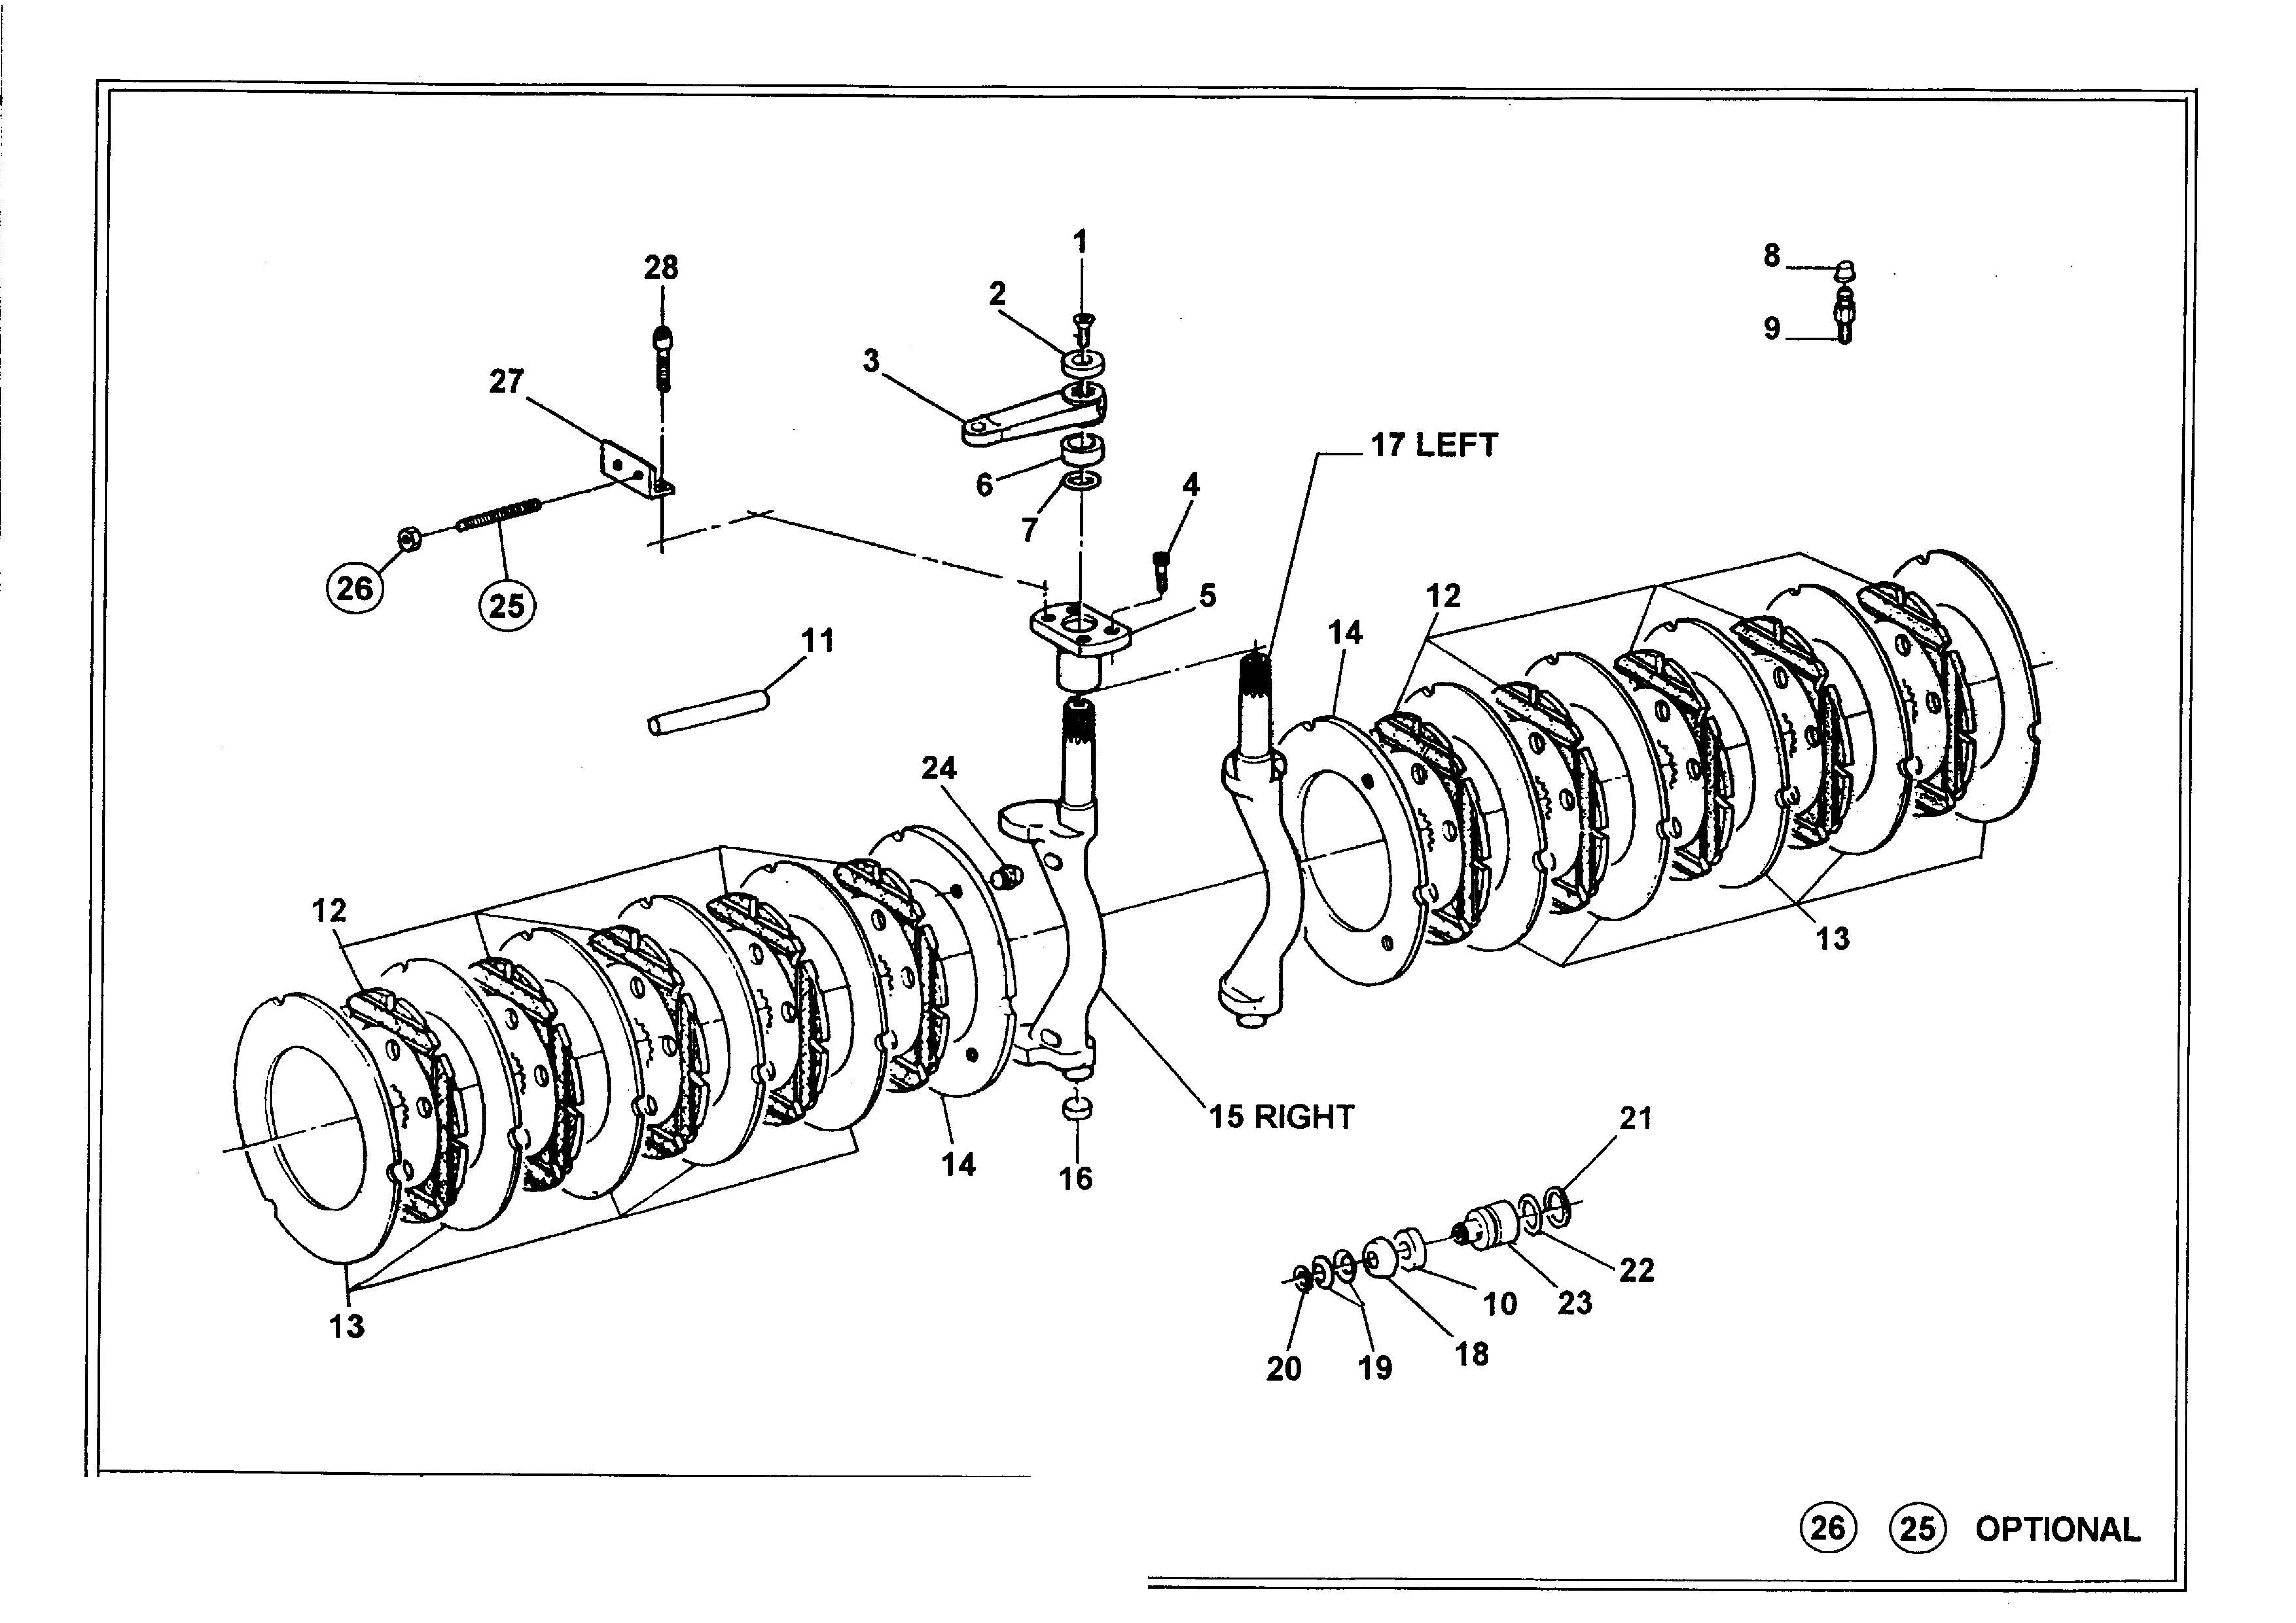 drawing for BRODERSON MANUFACTURING 0-055-00012 - CIRCLIP (figure 5)